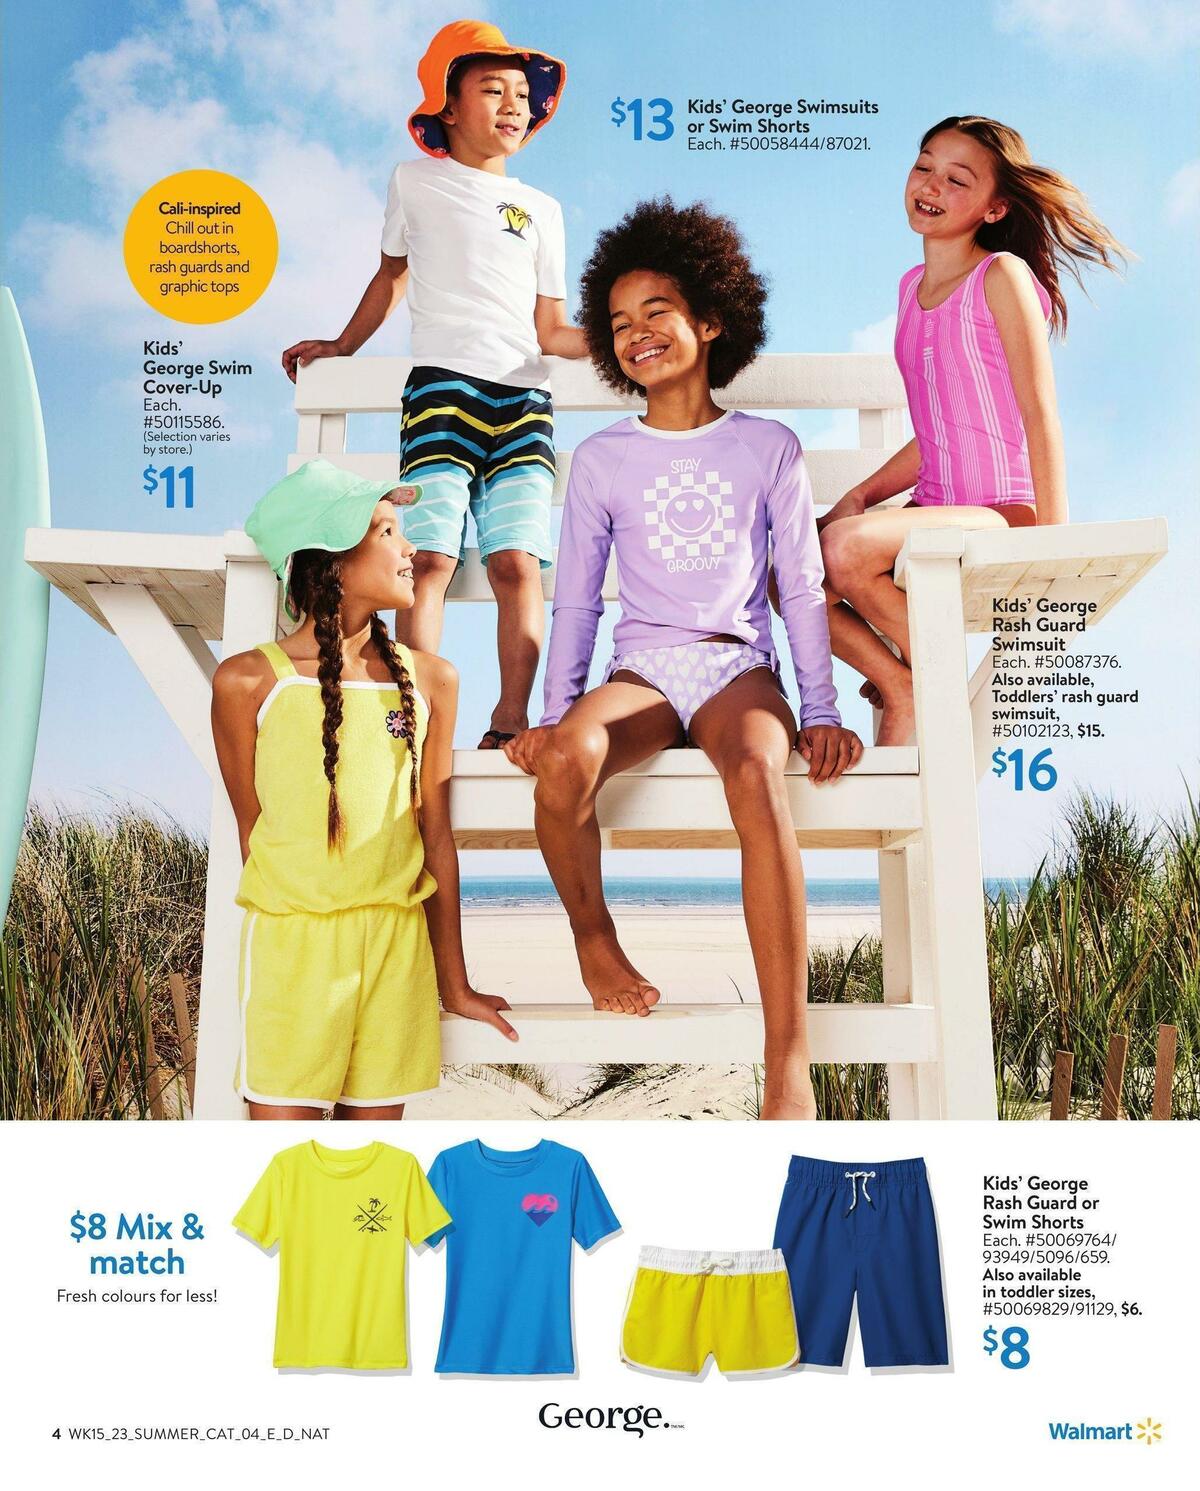 Walmart Summer Digest Flyer from May 4